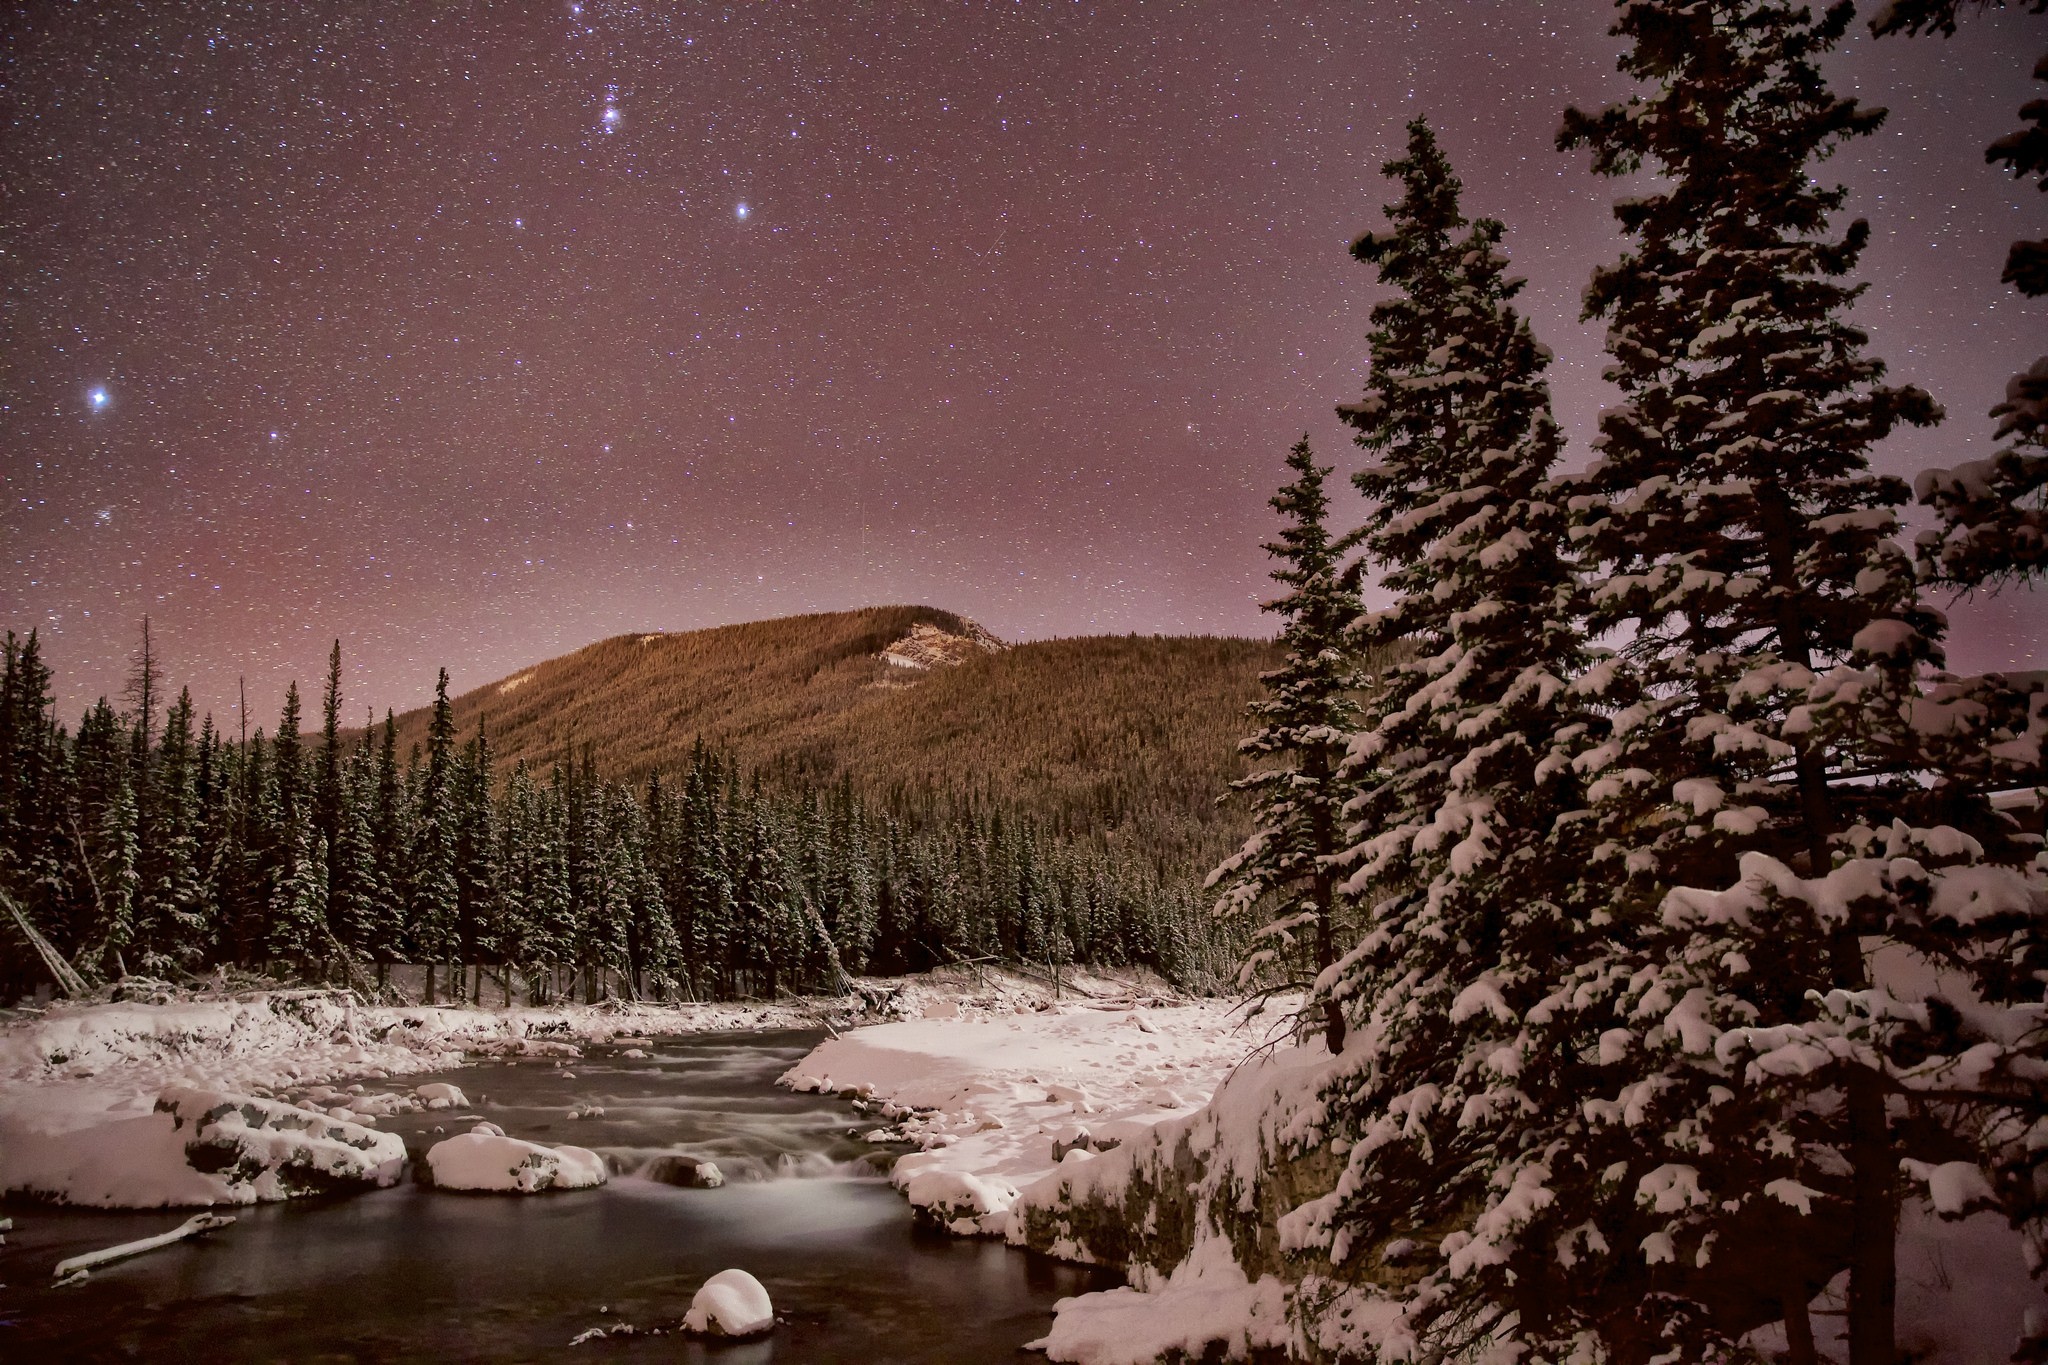 General 2048x1365 plants landscape mountains snow nature cold outdoors creeks sky stars ice trees